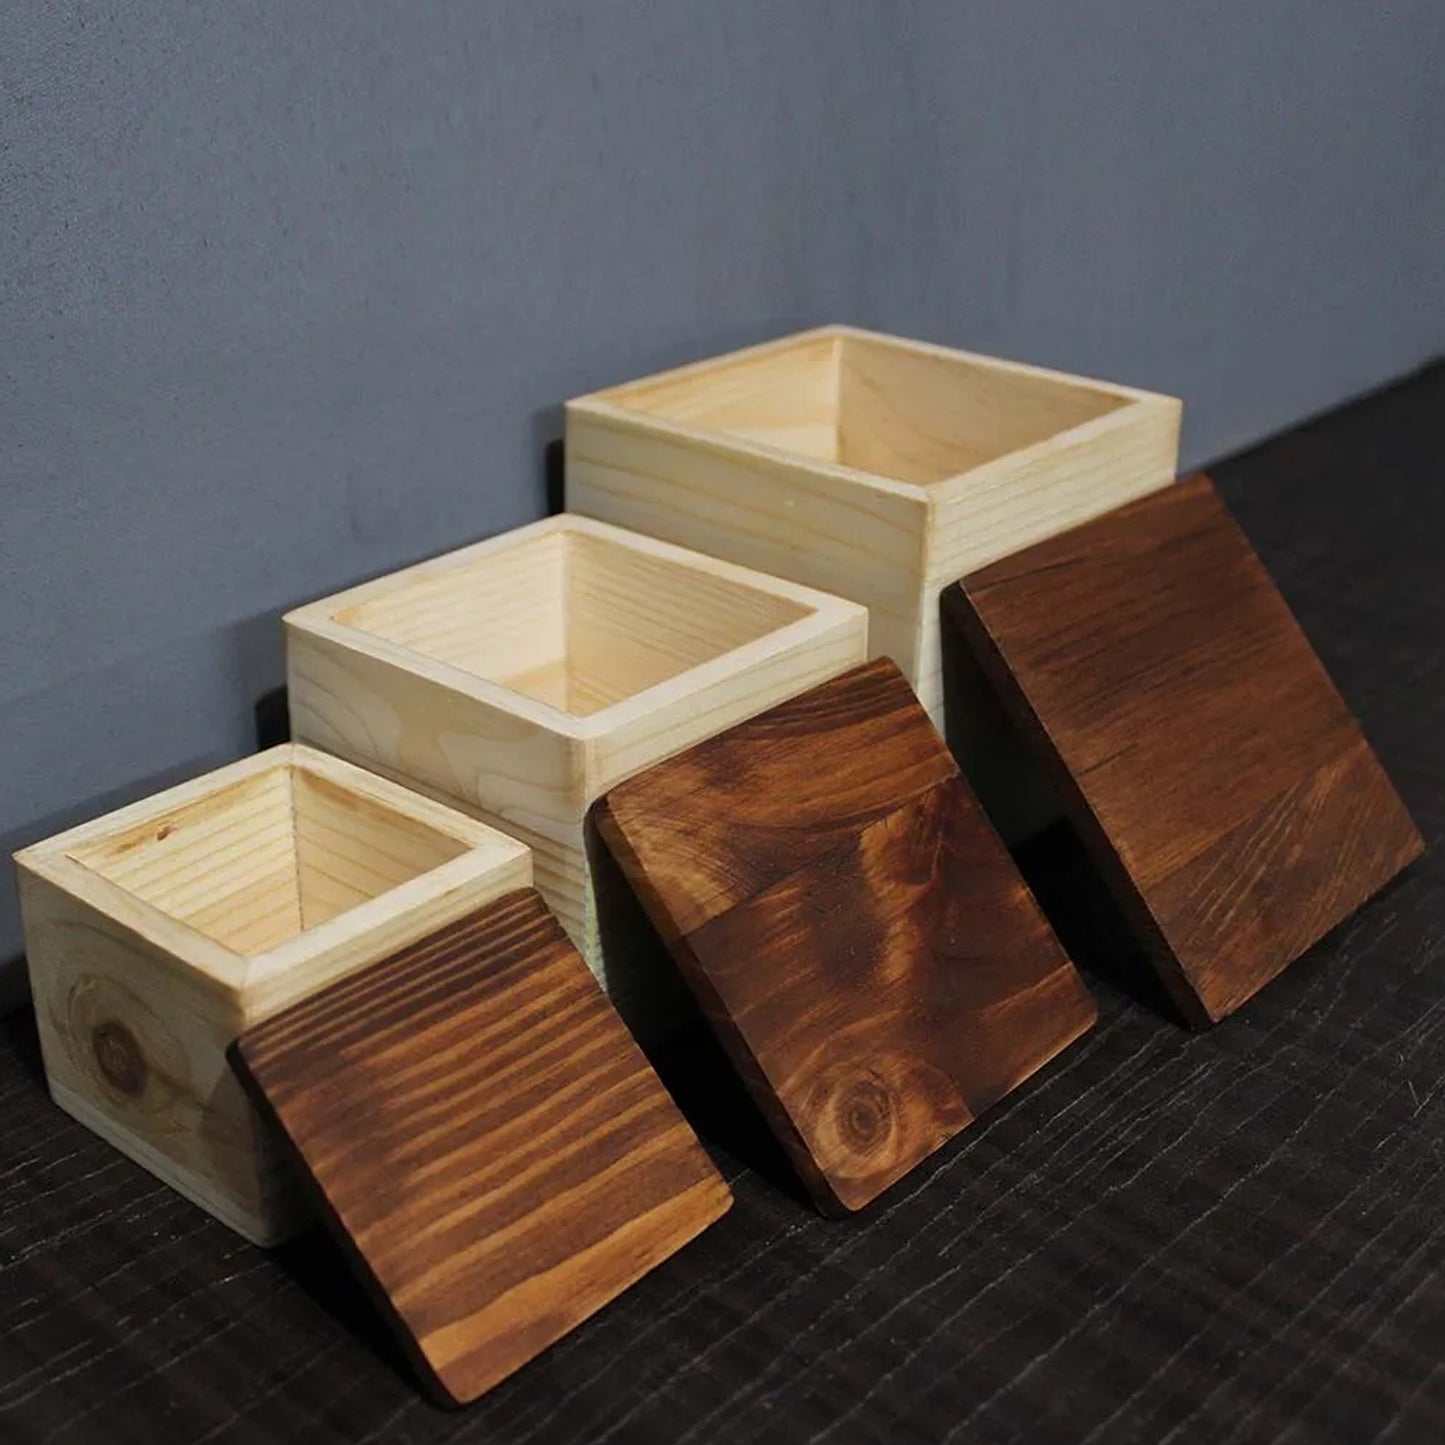 Handcrafted Wooden Box Set : Desktop / Tabletop Organizer : A Set Of 3 Boxes